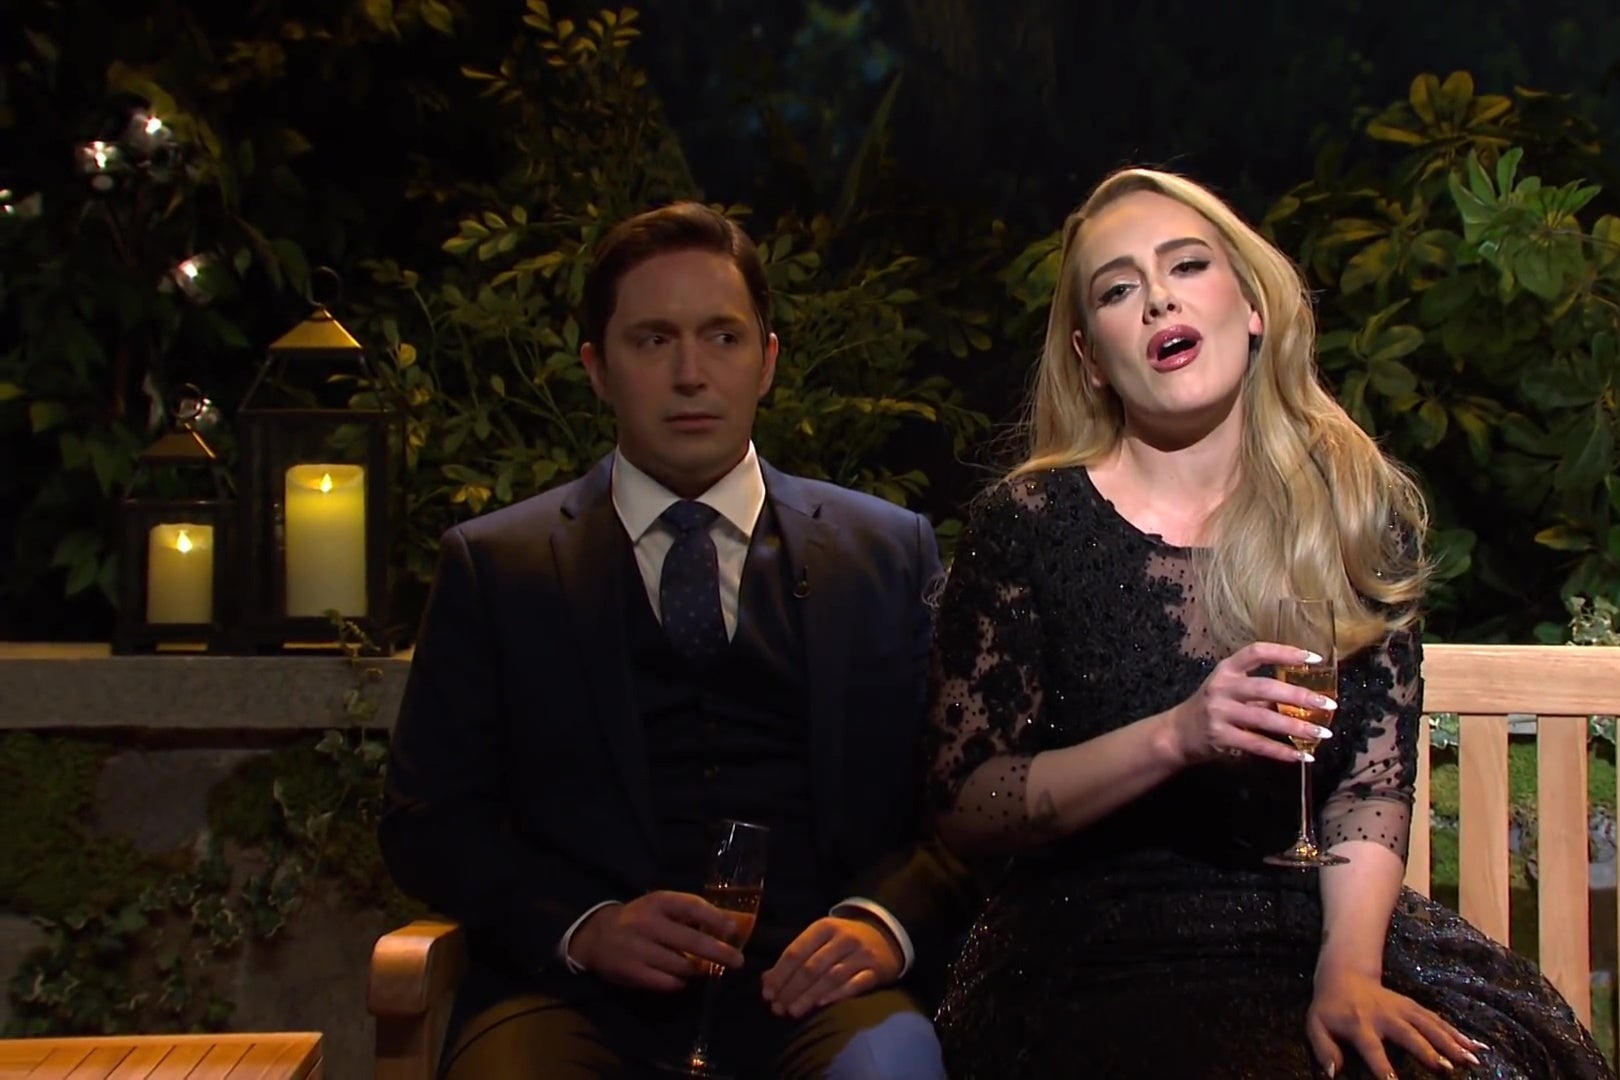 Beck Bennett and Adele sit on a wooden bench on a candlelit patio. Adele is singing while Bennett gives her a side-eyed look.